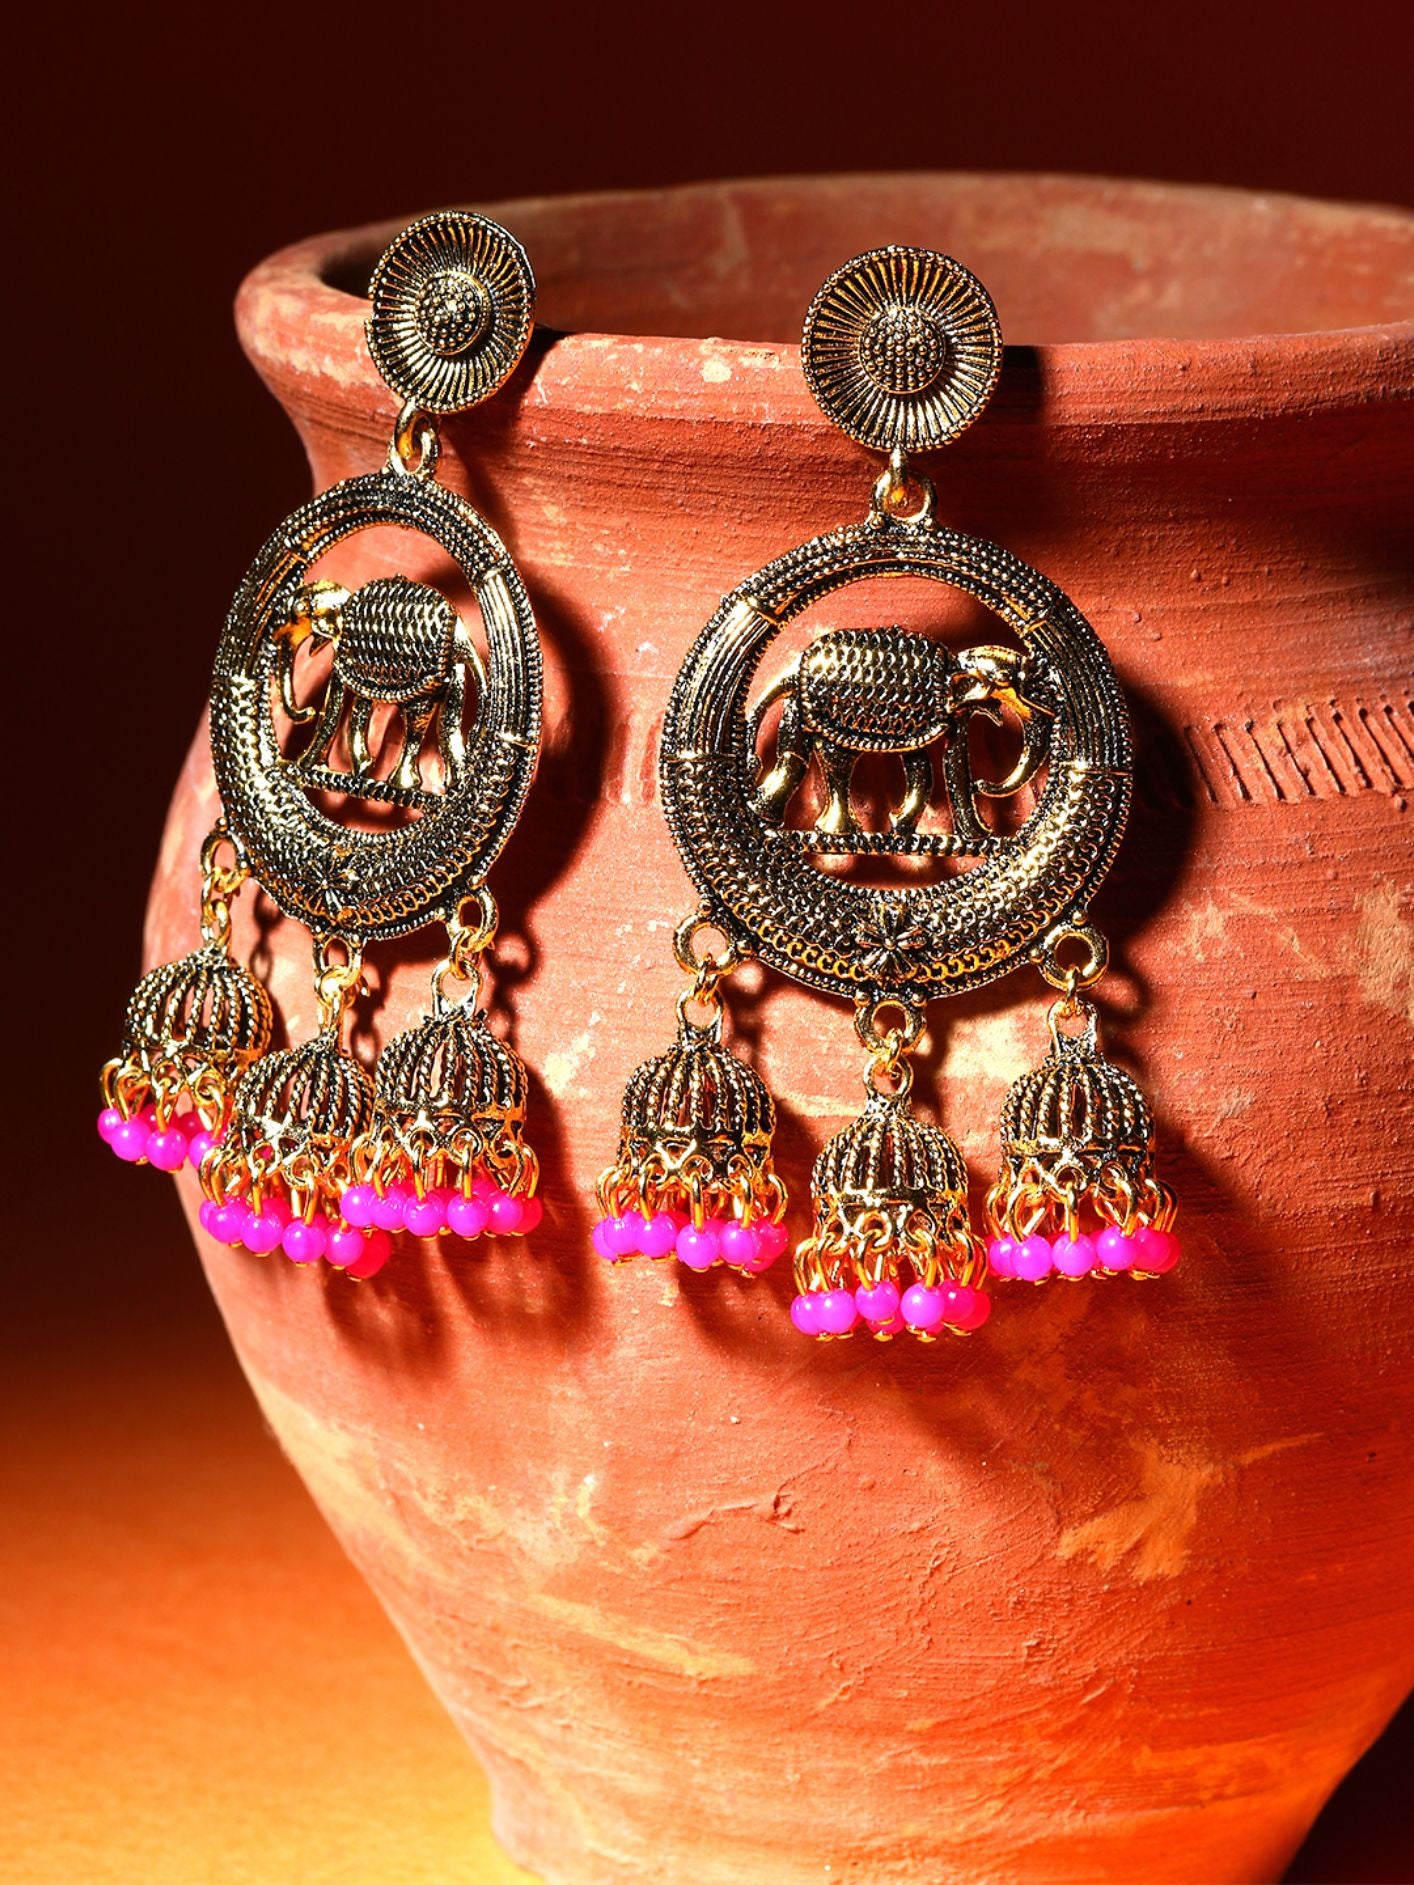 Women's Gold Plated & Pink Enamelled Circular Shaped Drop Earrings - Anikas Creation